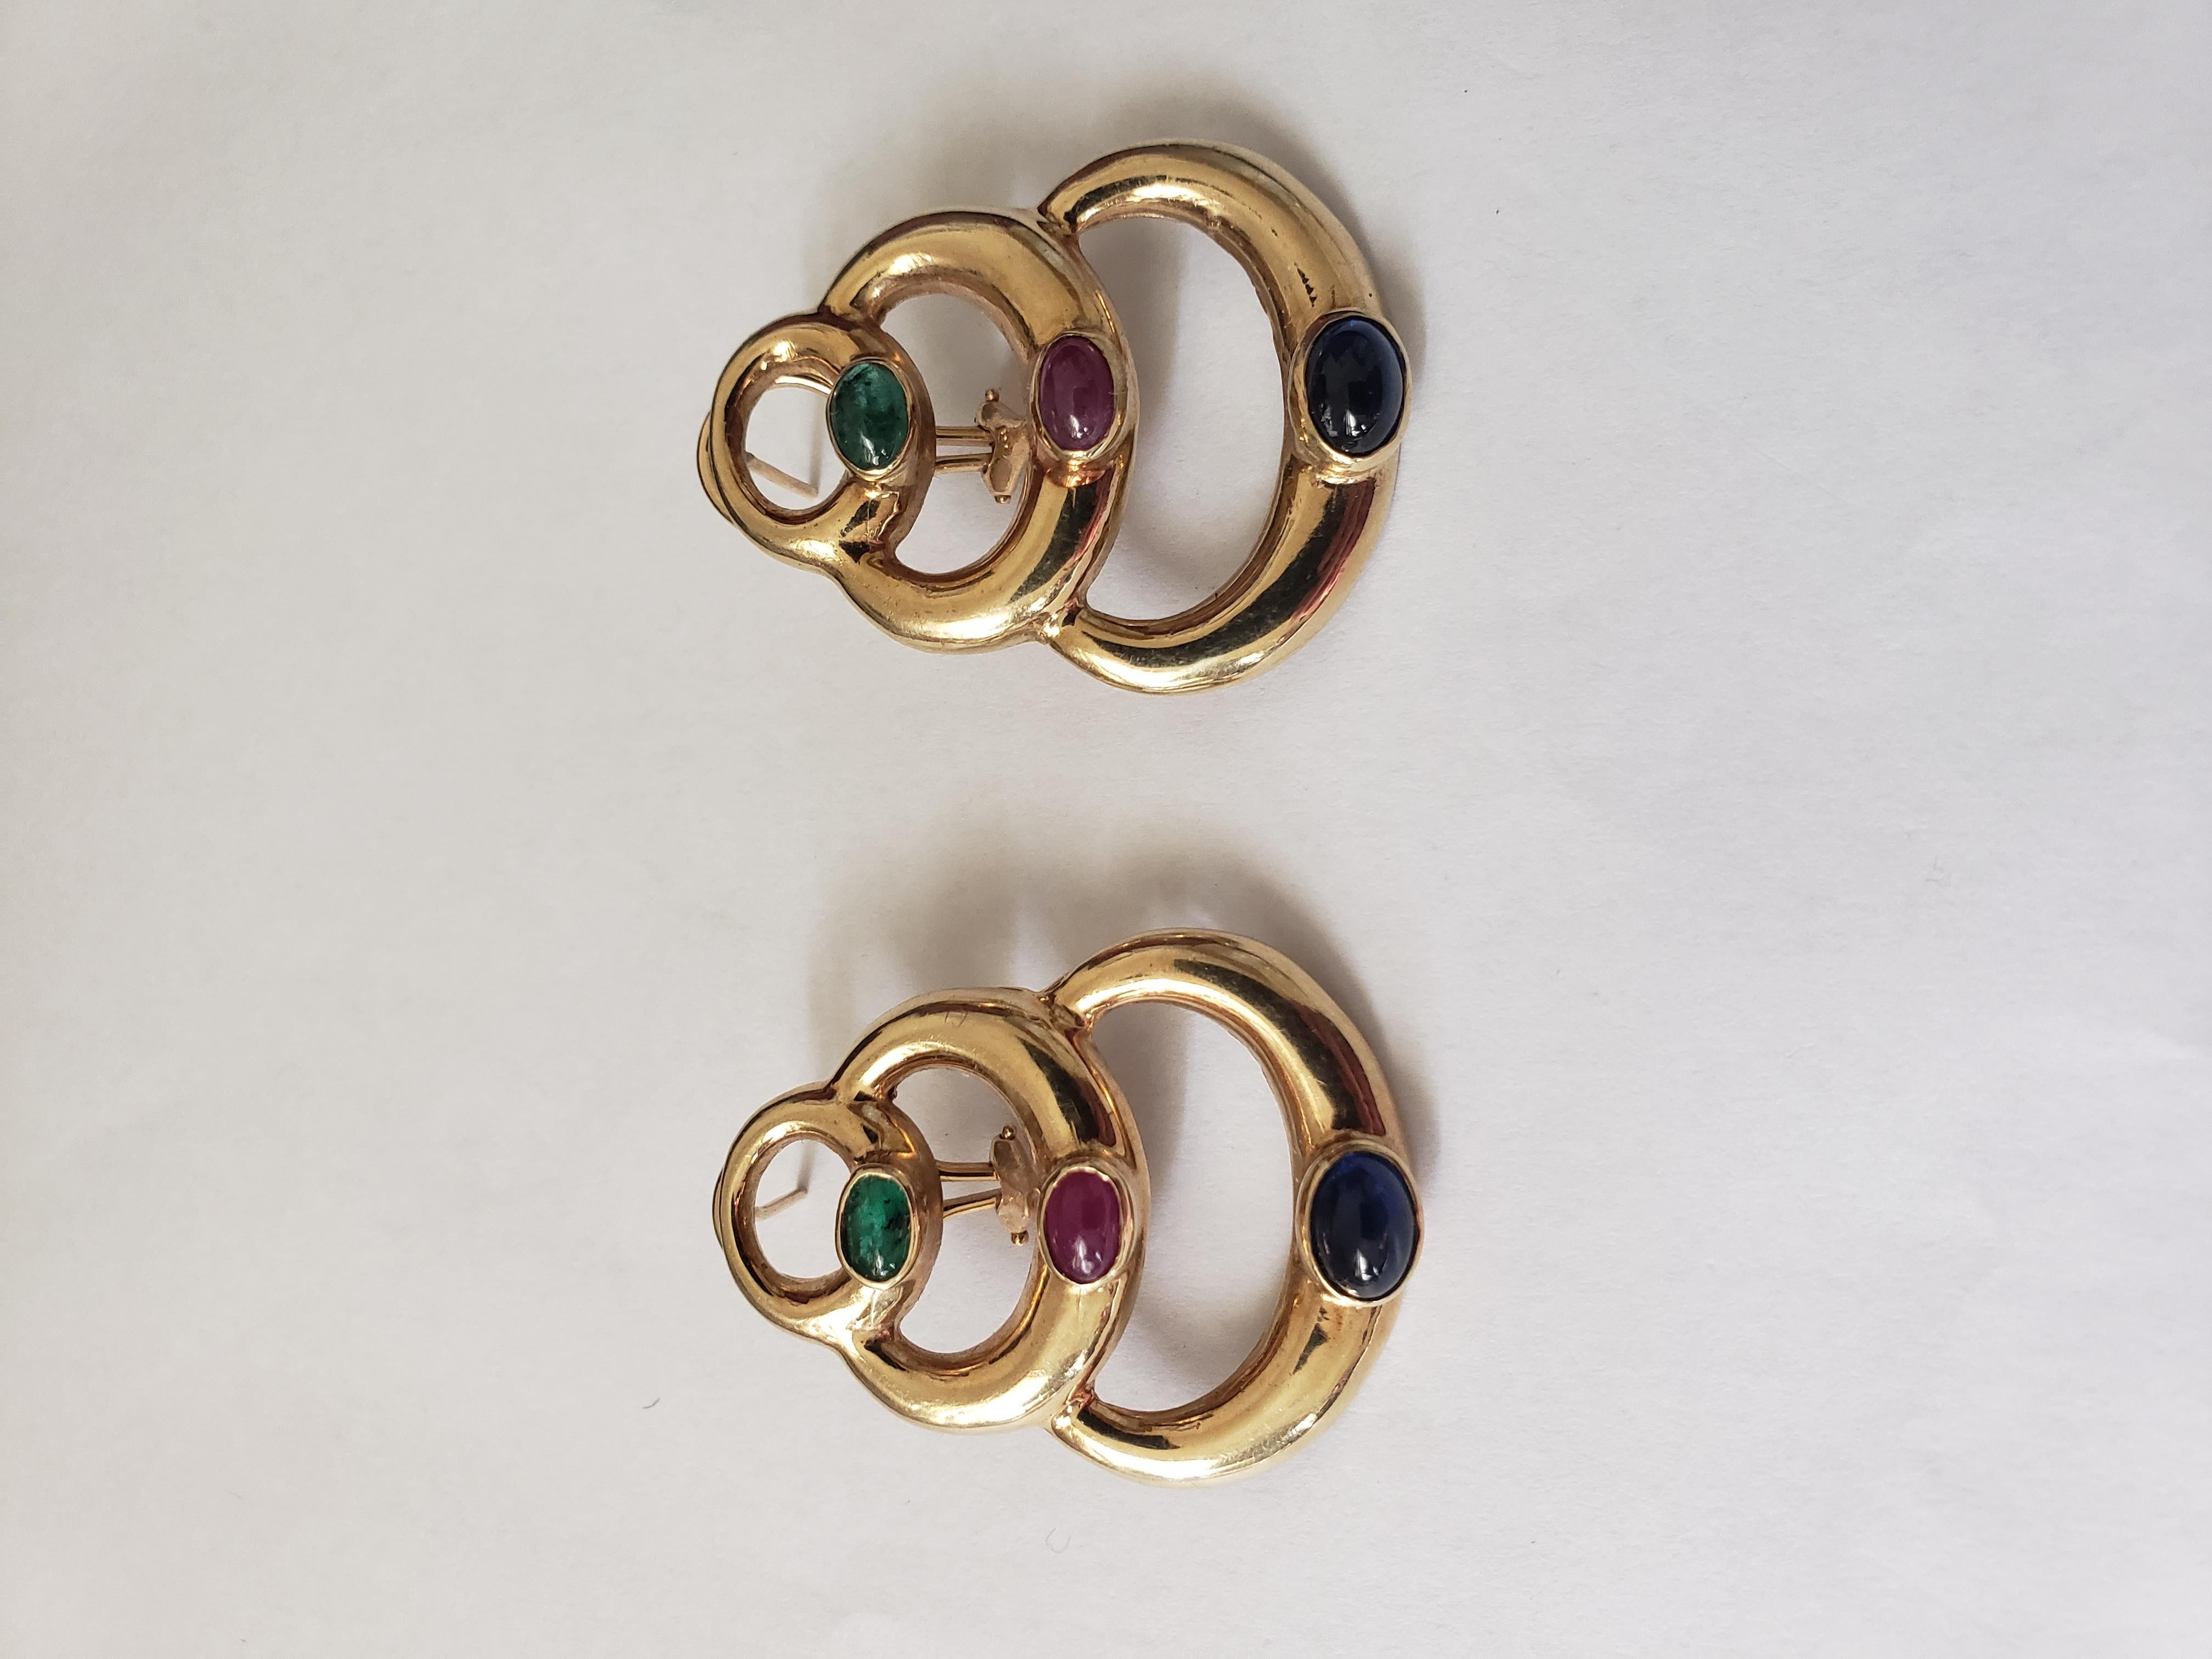 These stunning 14K solid yellow gold earrings feature natural sapphires, rubies, and emeralds in an oval shape. The beautiful Byzantine theme adds a unique touch to these handmade stud-style earrings. The antique and vintage elements, along with the